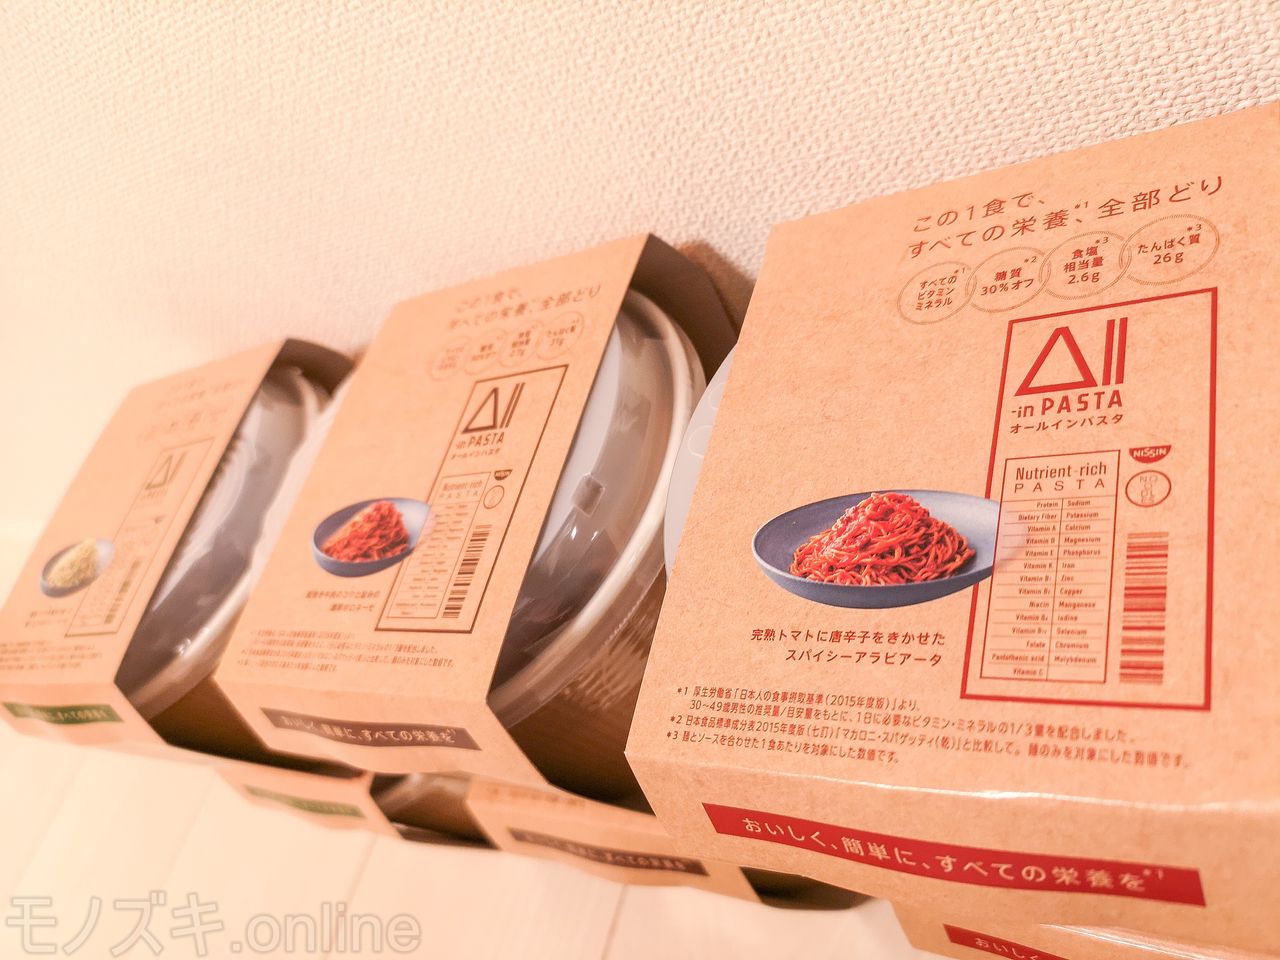 All-in PASTA カップ3種×2